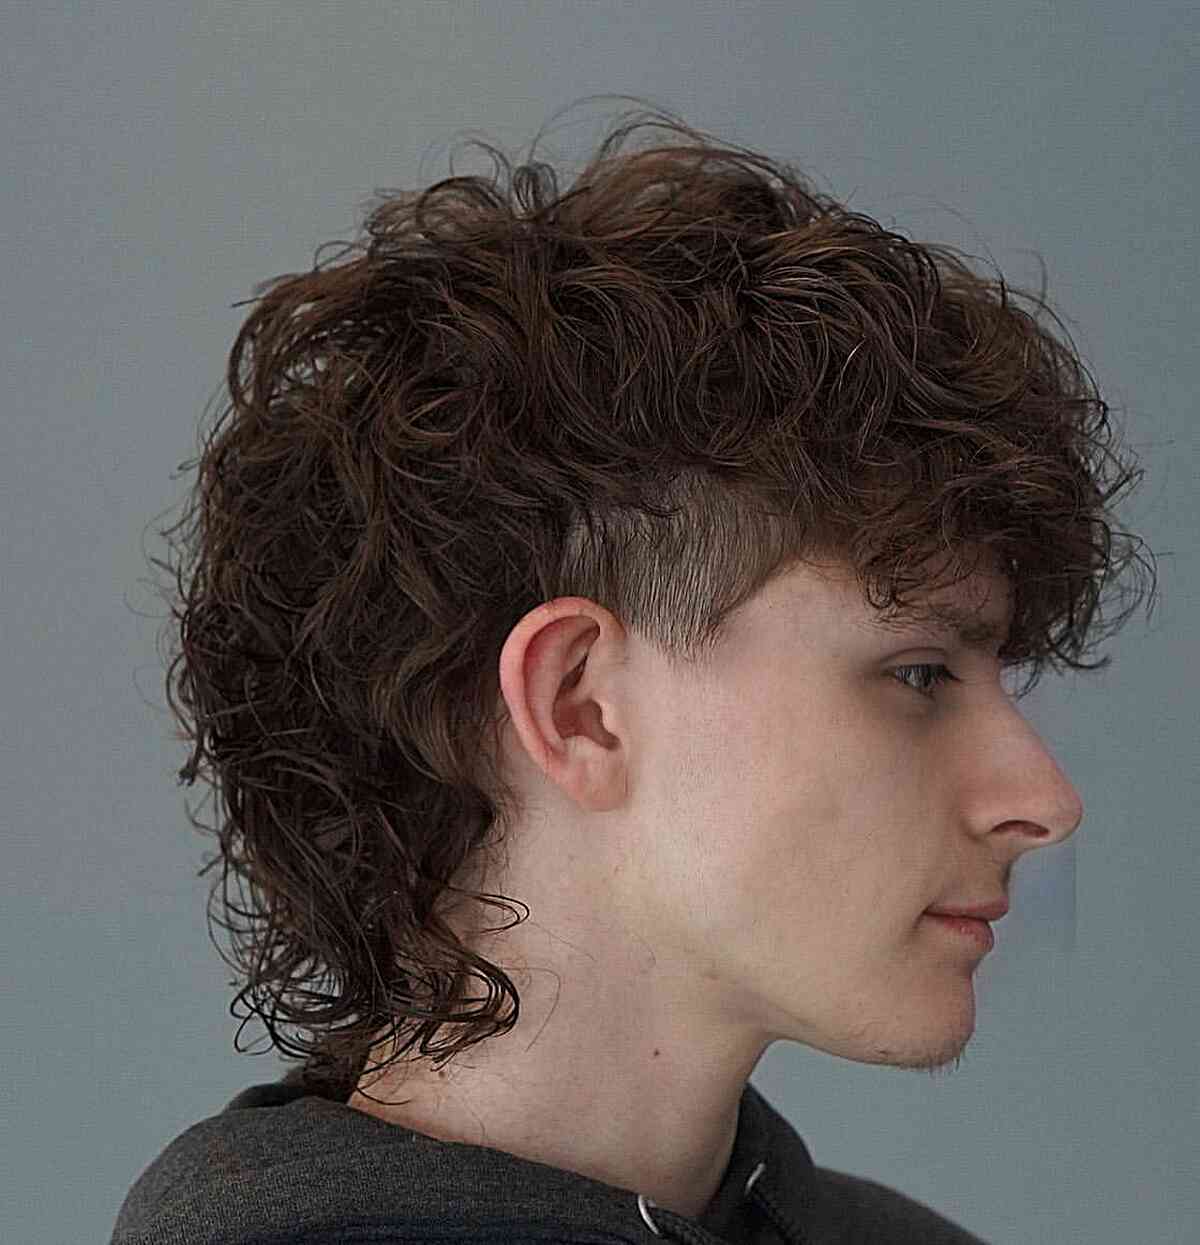 Tousled Curls with Mid-length Mullet Haircut for Boys